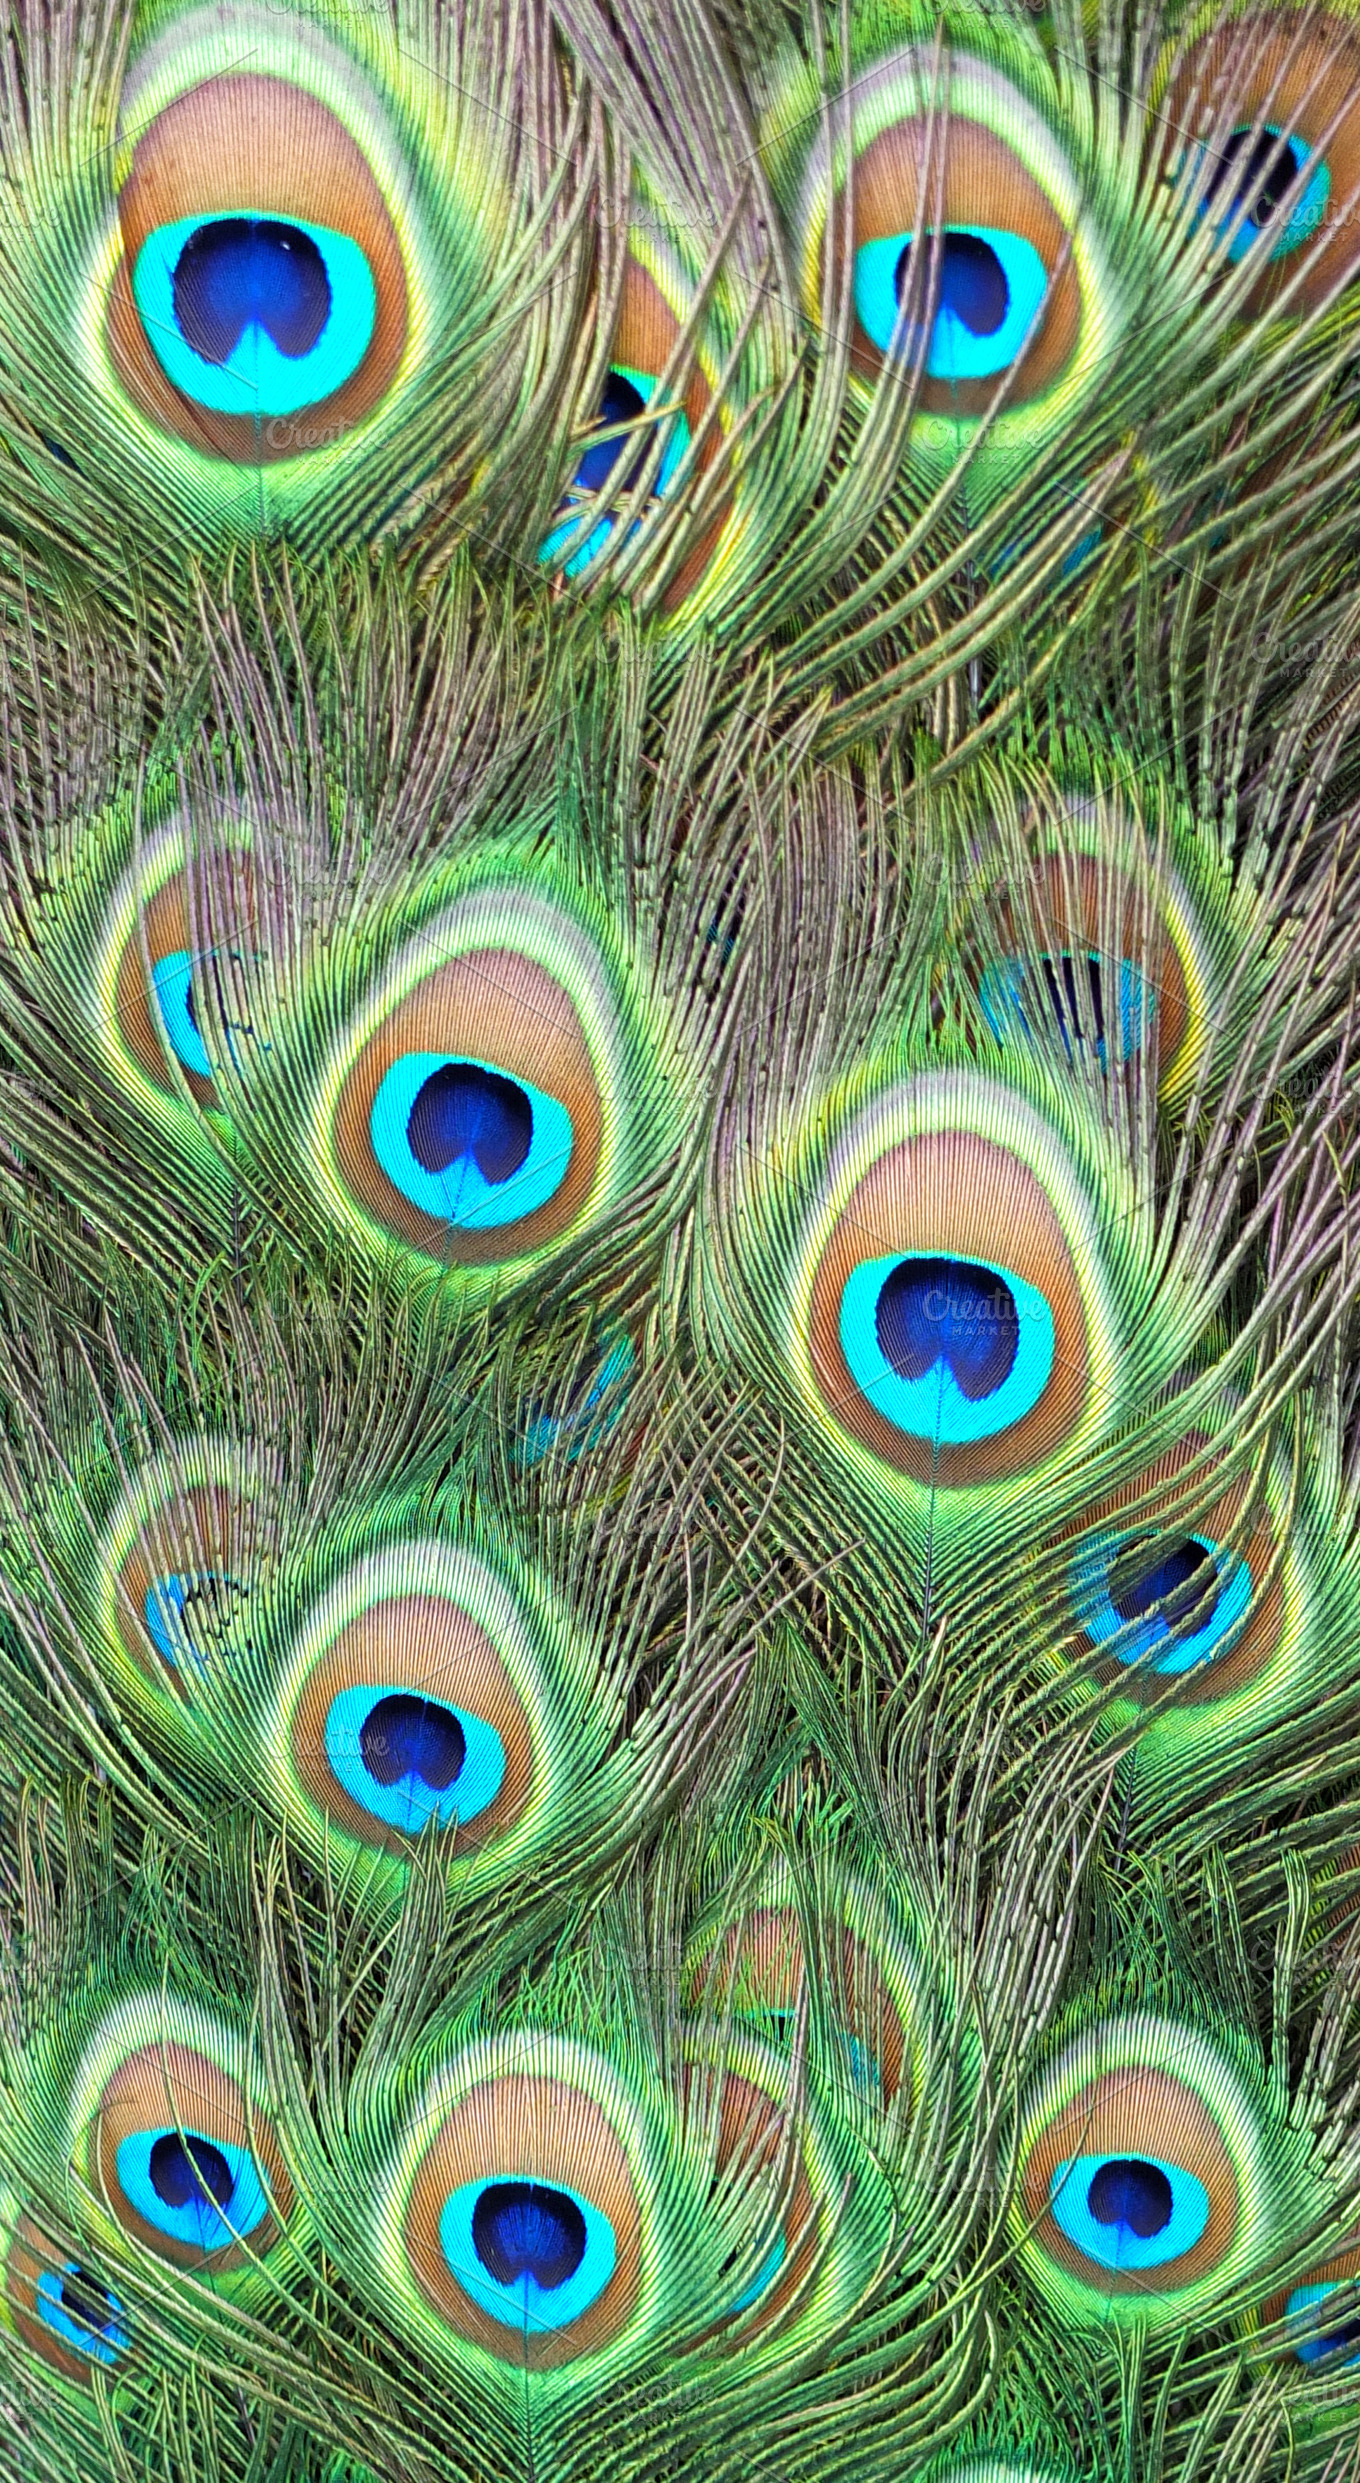 Peacock Feathers by Kyra62442 on DeviantArt